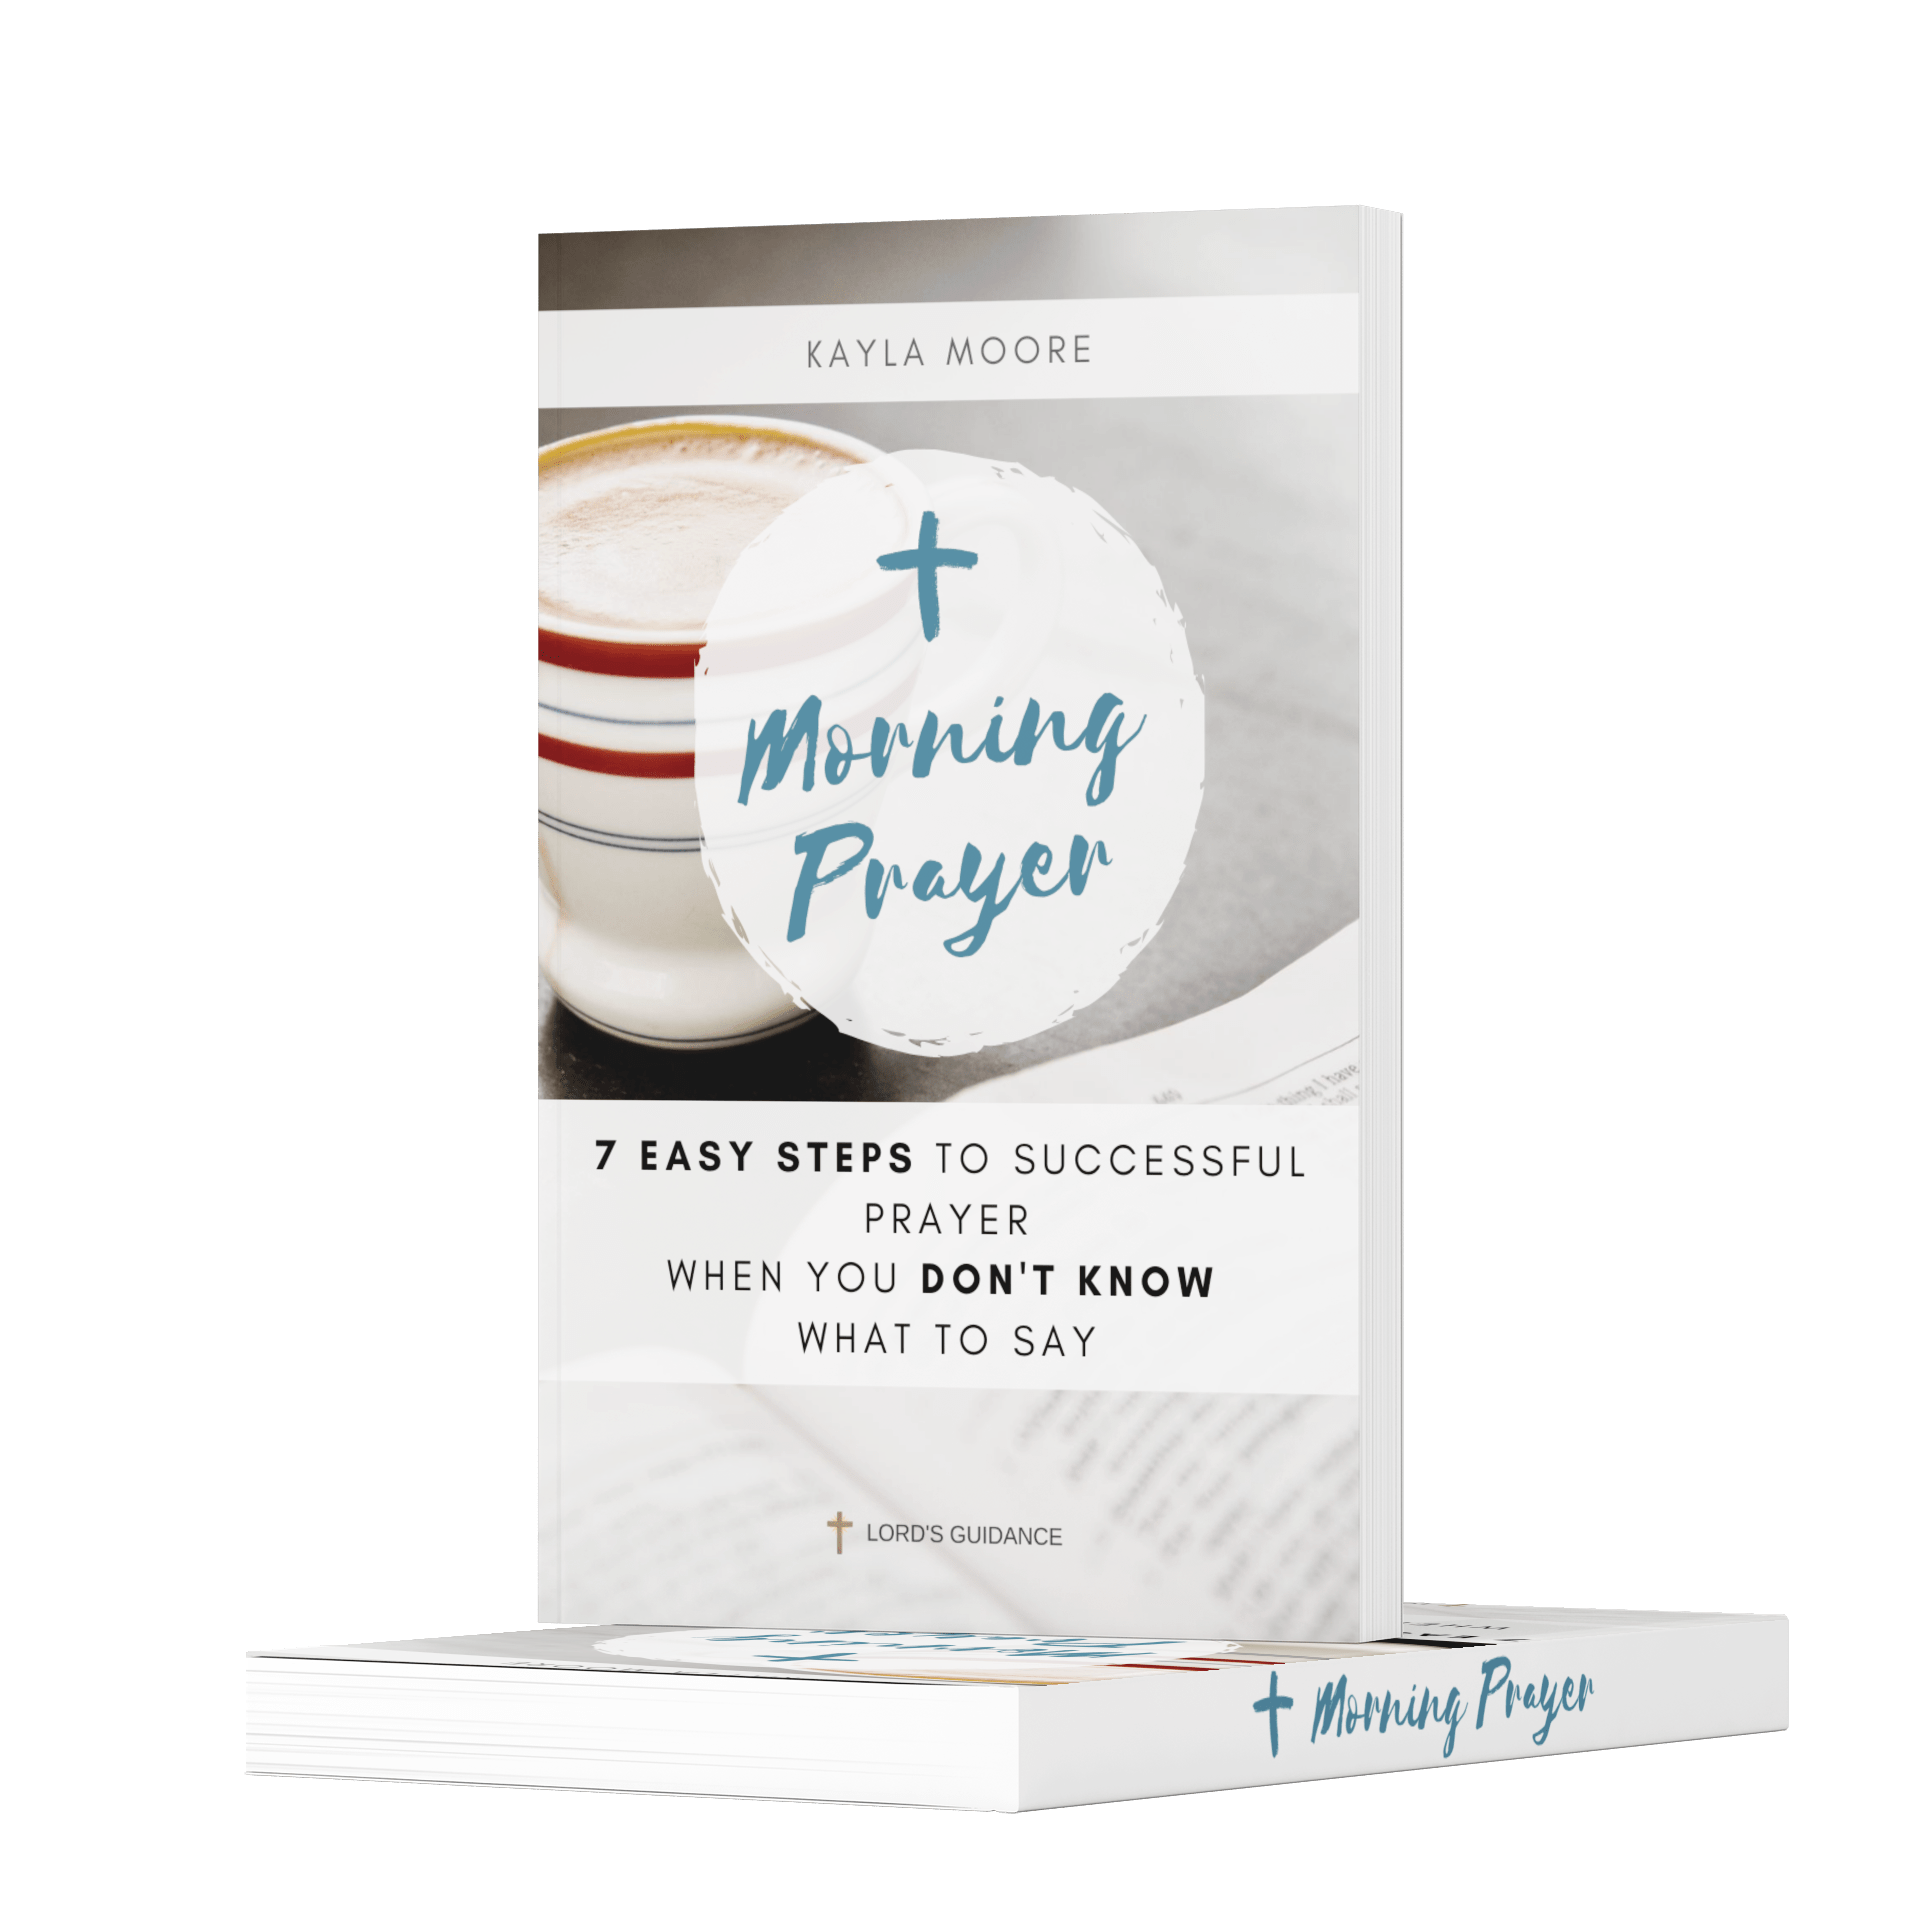 Morning Prayer: 7 Easy Steps To Successful Prayer When You Don't Know What To Say